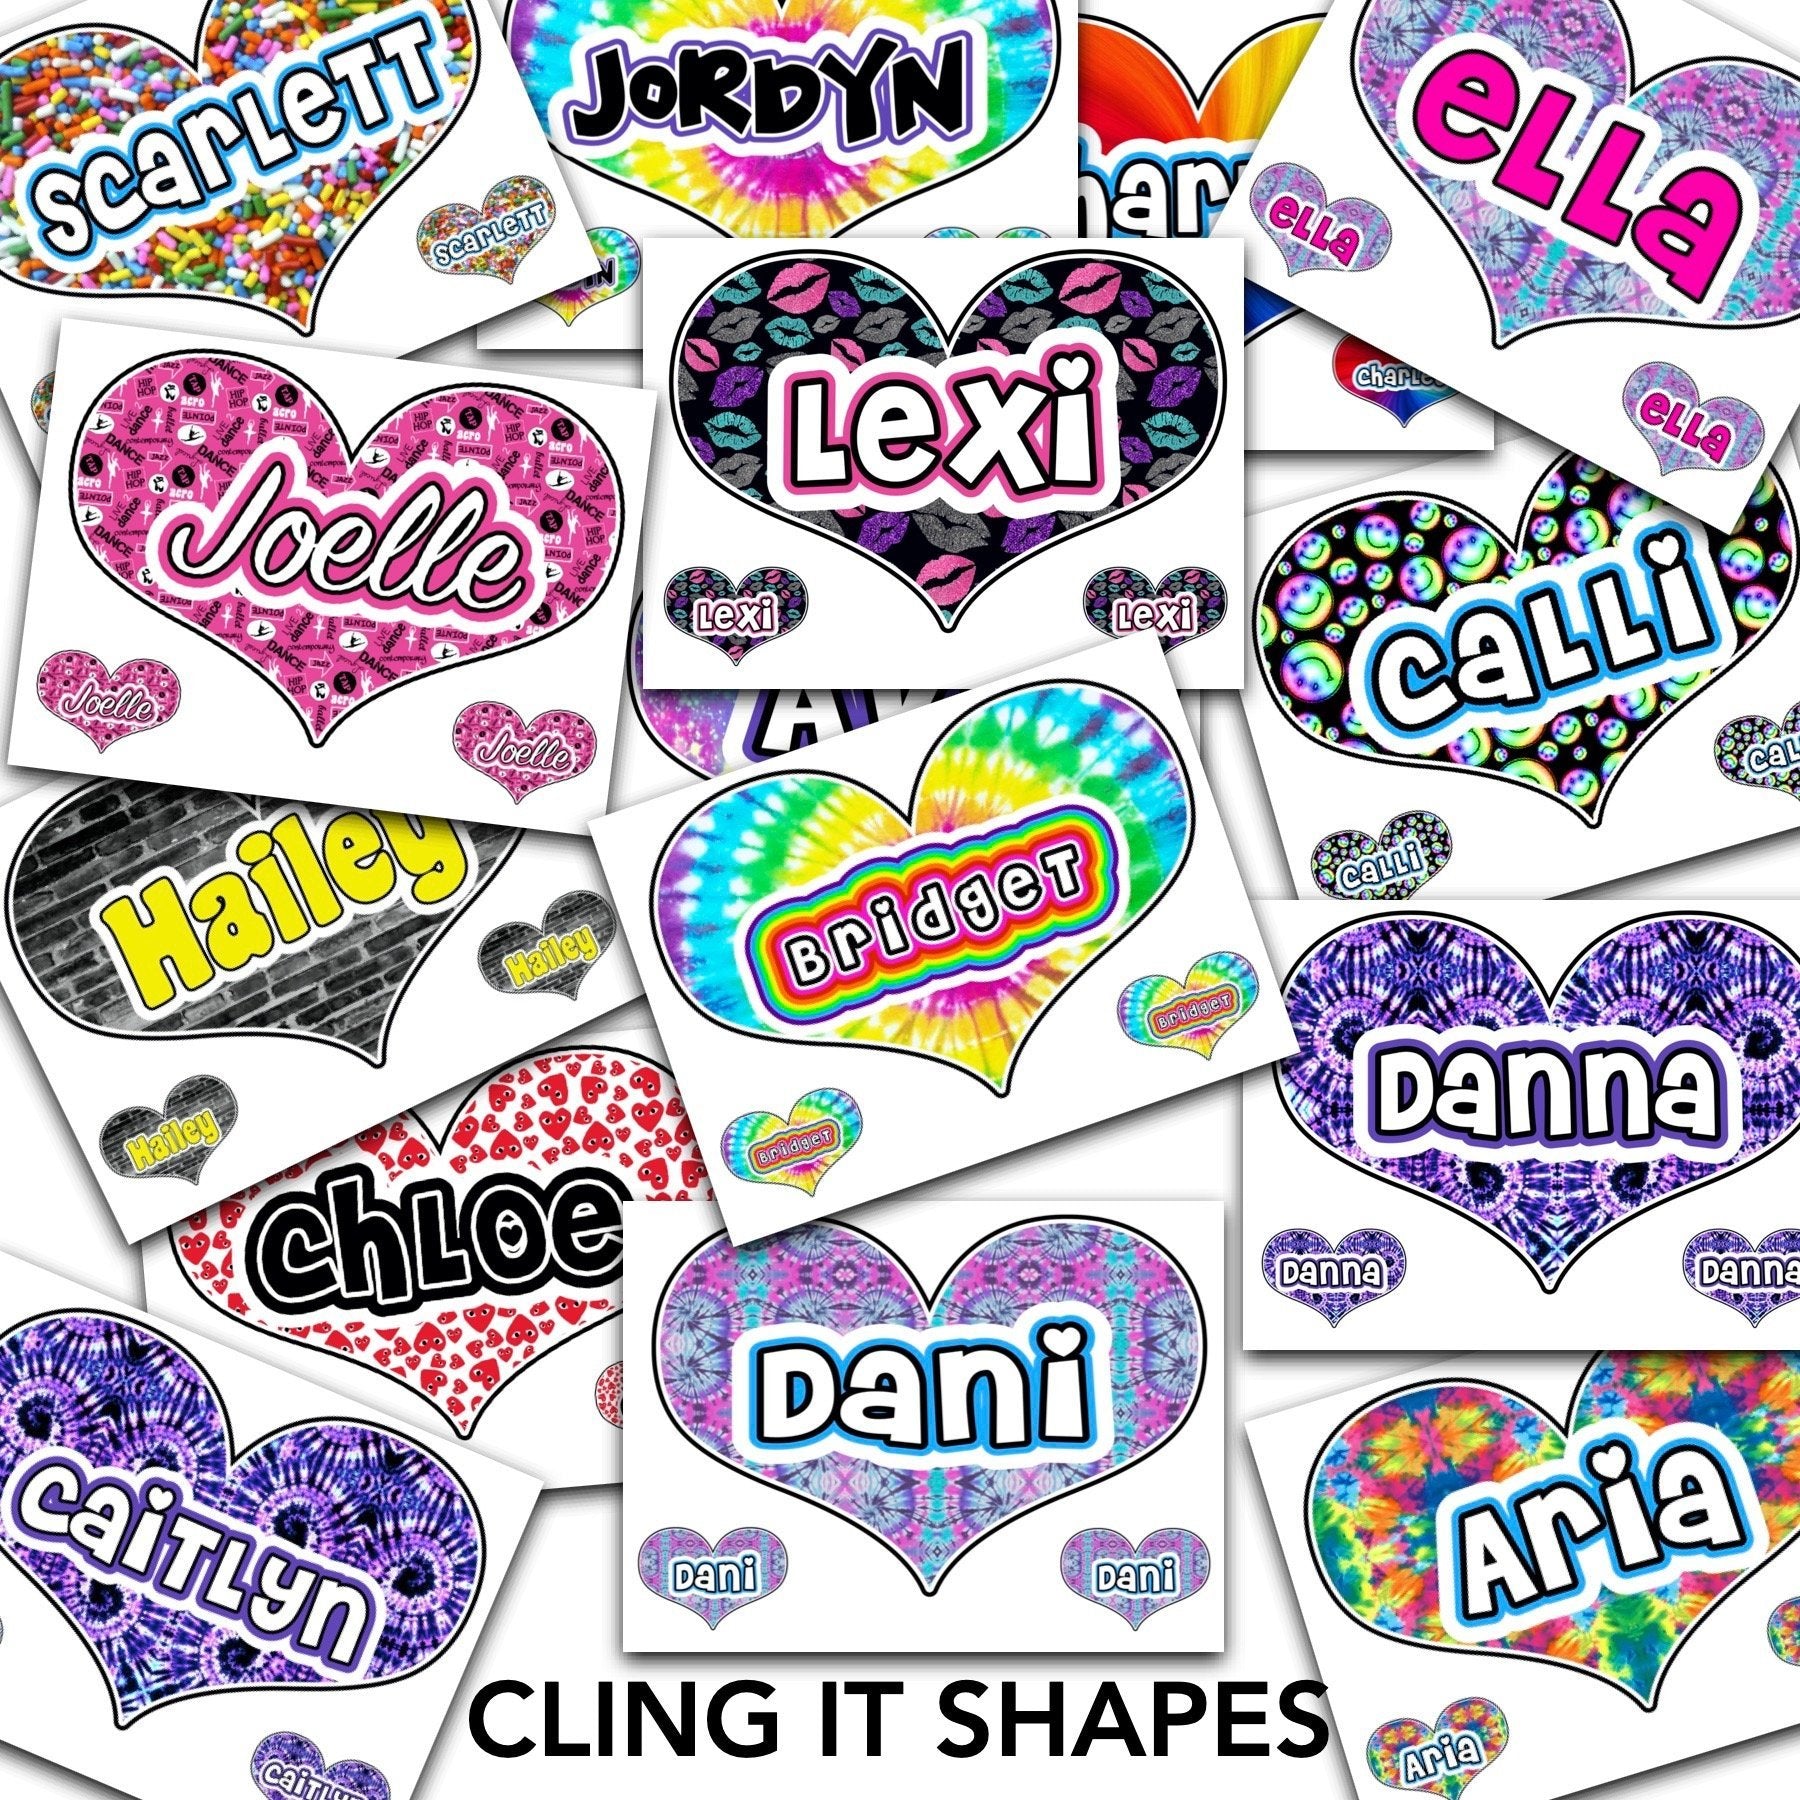 Large 9x12 Shaped Cling Its. - a Spirit Animal - Cling Its Name Needed Cling Its Name Needed decals Namedrops